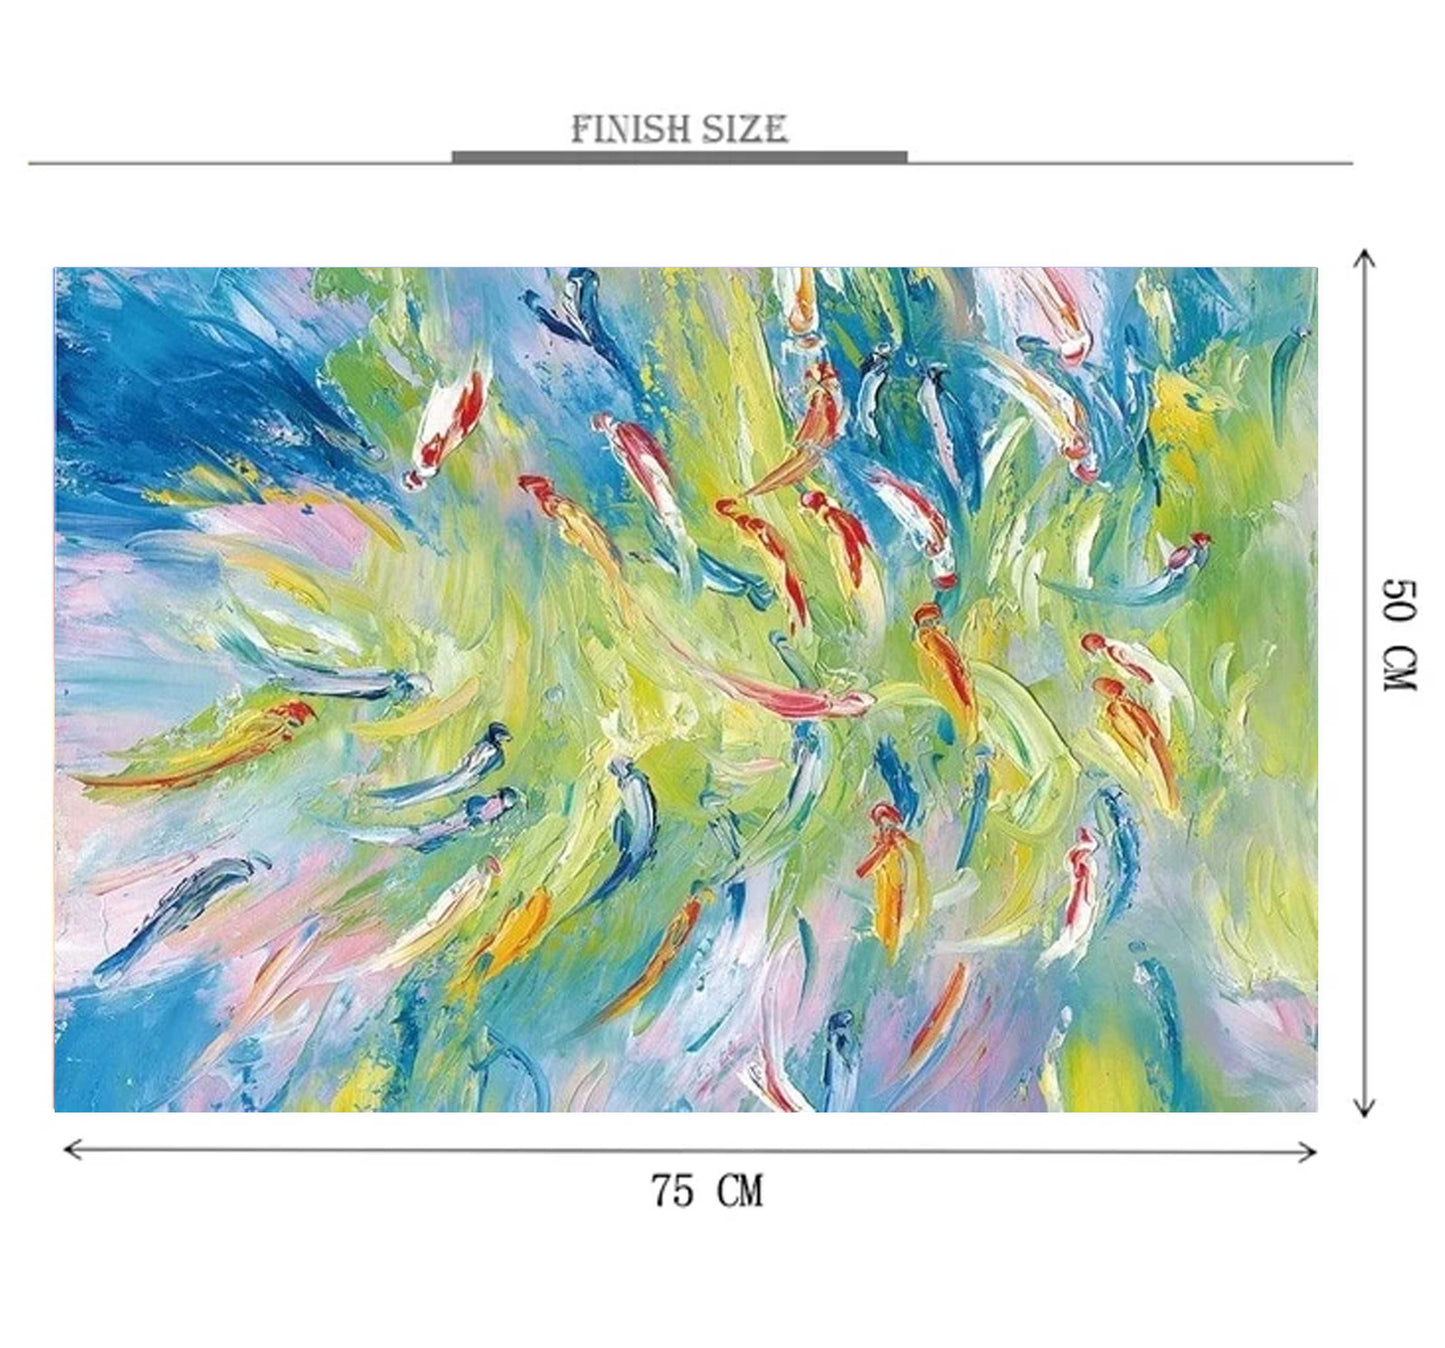 Abstract Fish Painting 1000 Piece Jigsaw Puzzle Toy For Adults and Kids